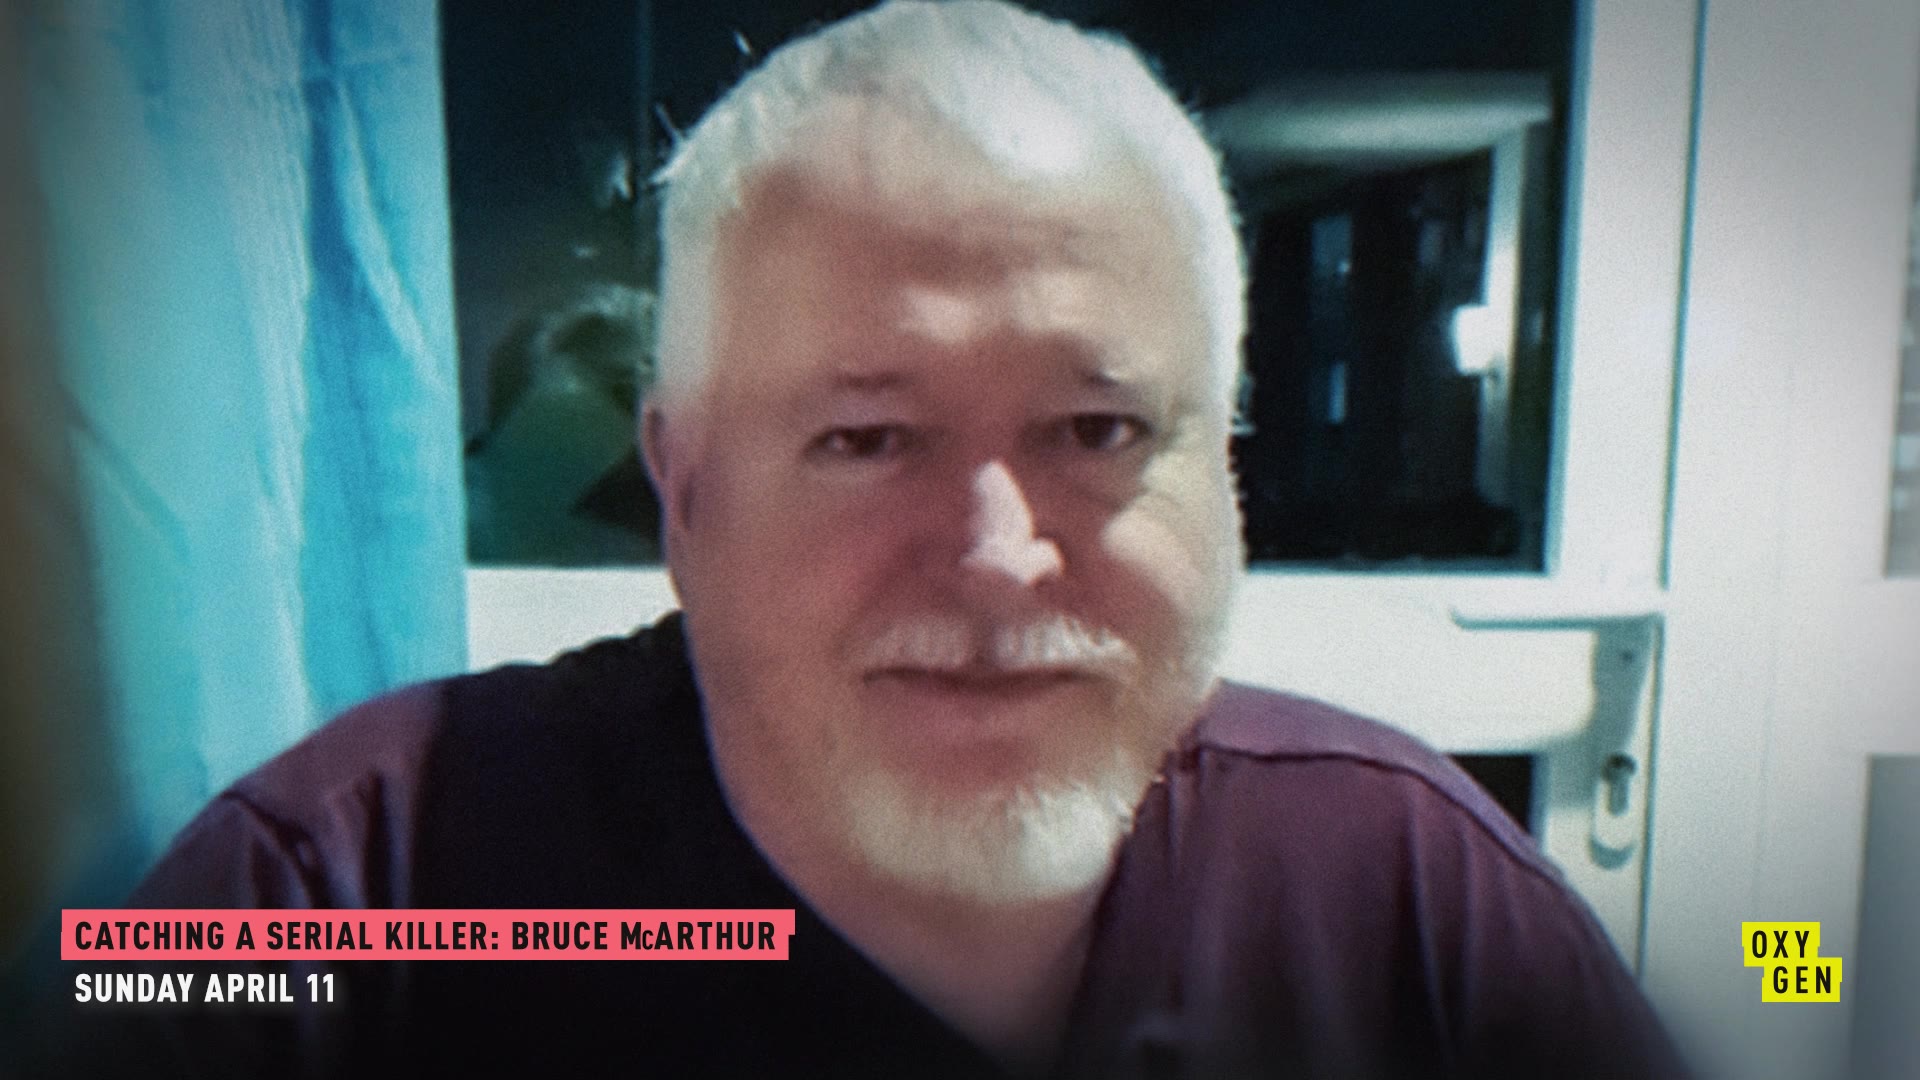 Catching a Serial Killer: Bruce McArthur Premieres Sunday, April 11th